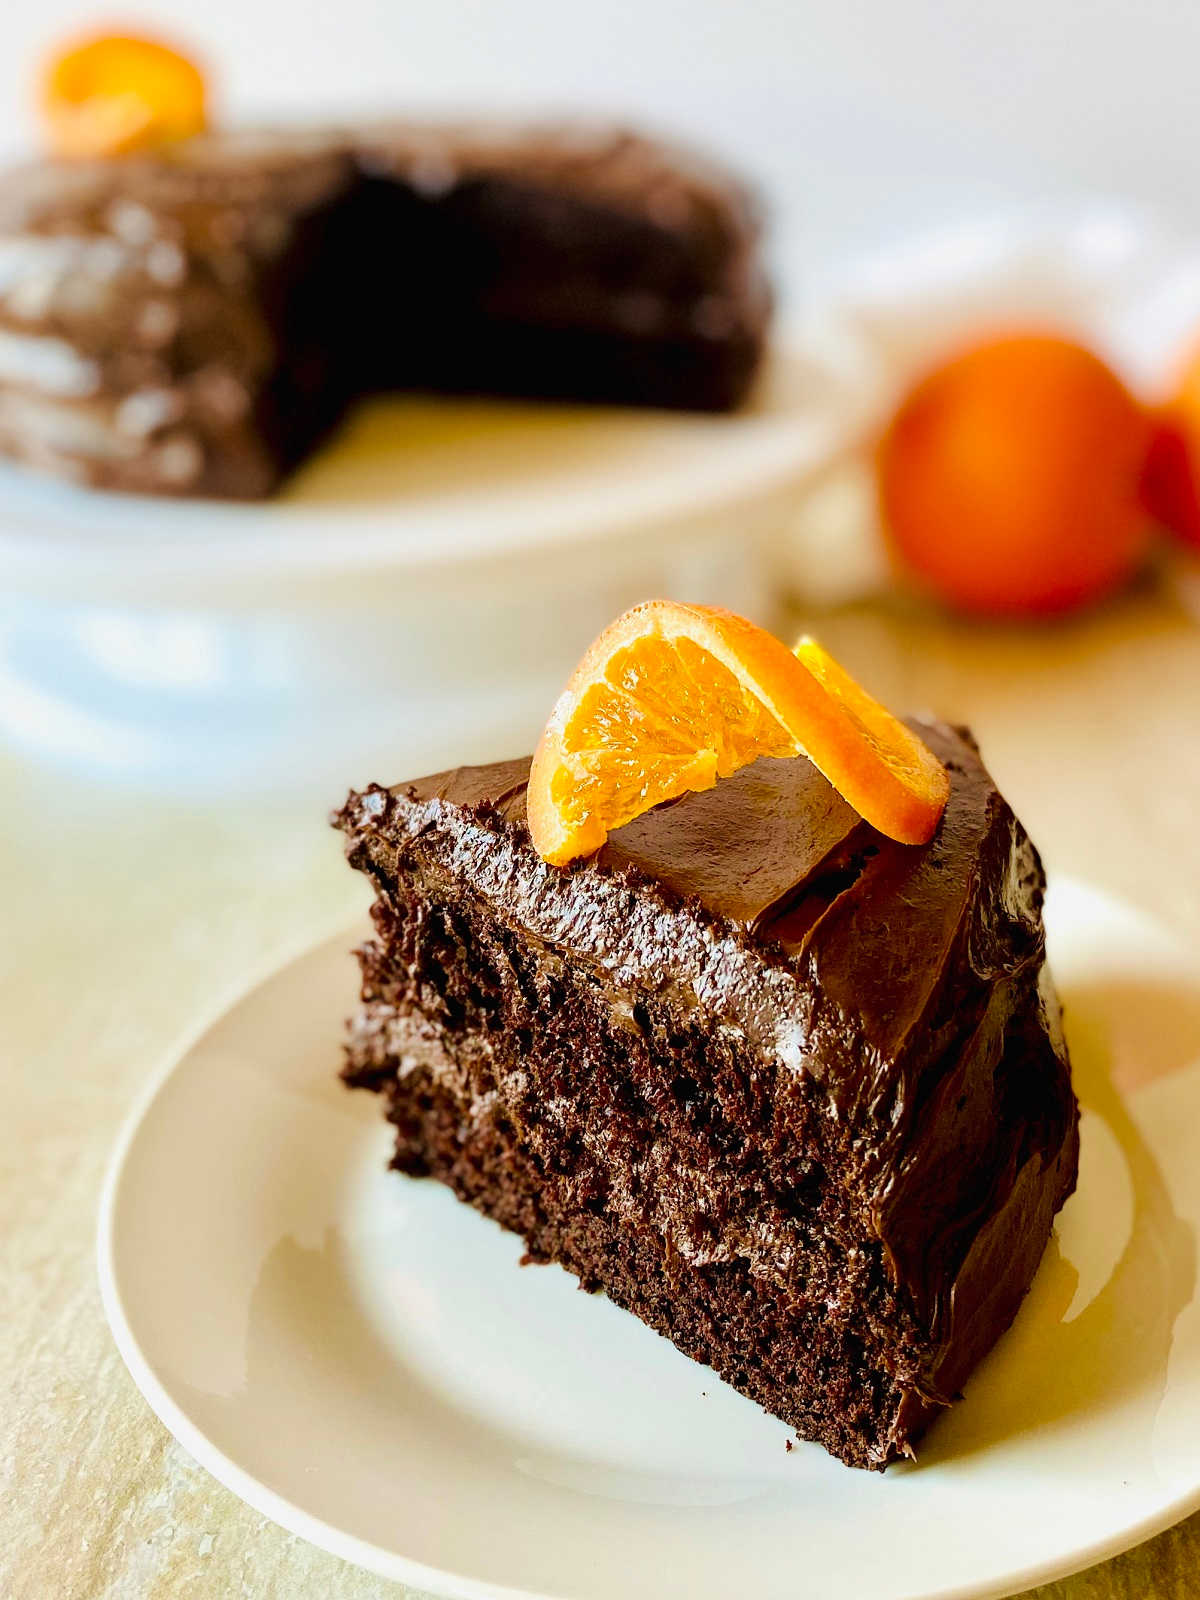 orange chocolate cake on a white plate garnished with a candied orange slice on top